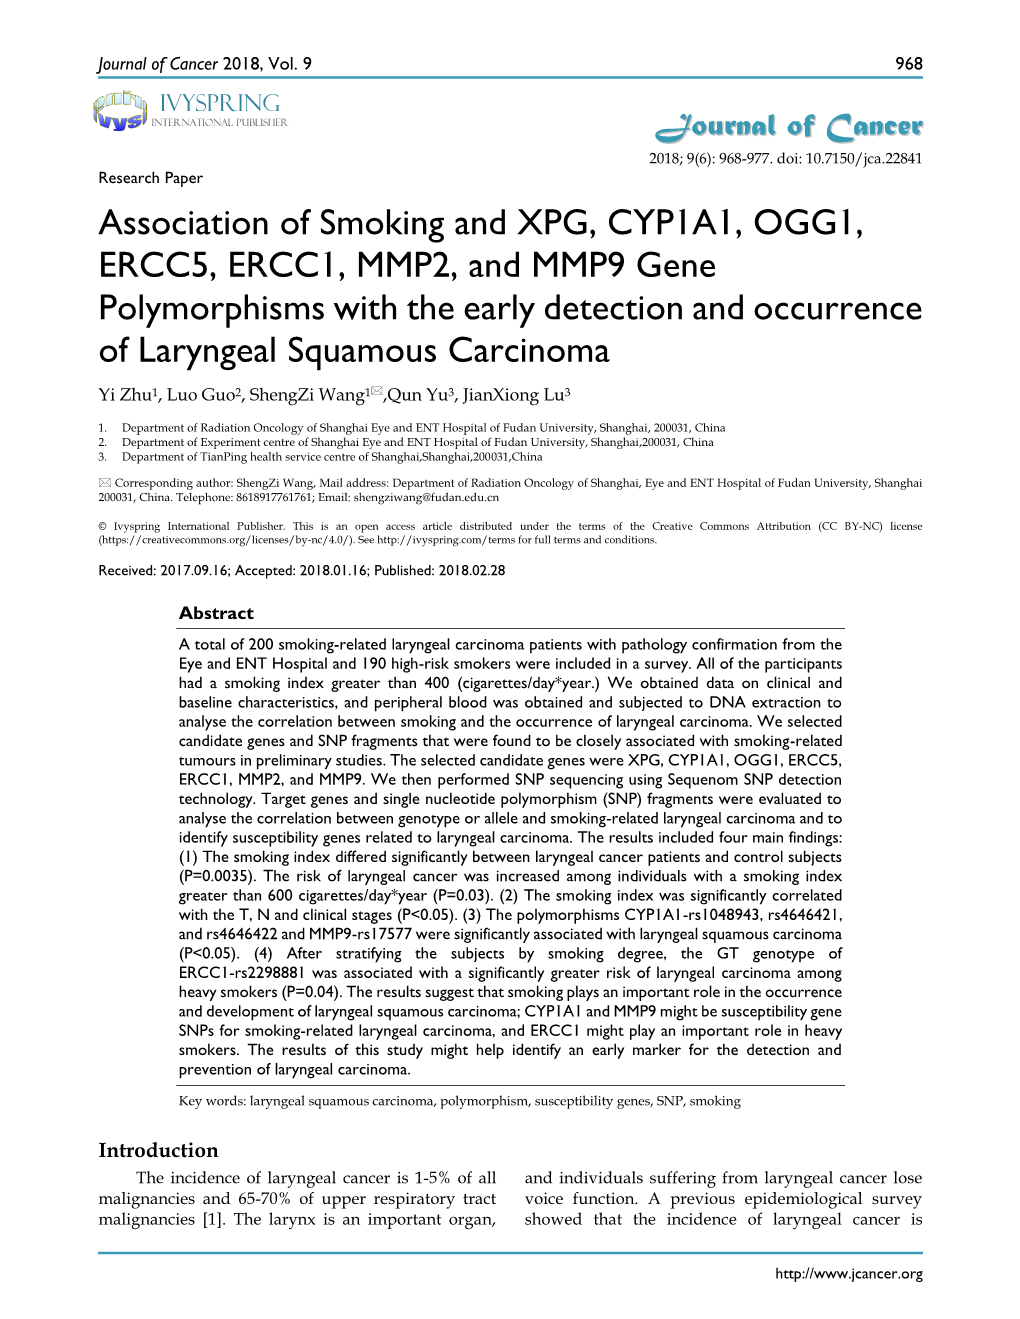 Association of Smoking and XPG, CYP1A1, OGG1, ERCC5, ERCC1, MMP2, and MMP9 Gene Polymorphisms with the Early Detection and Occurrence of Laryngeal Squamous Carcinoma